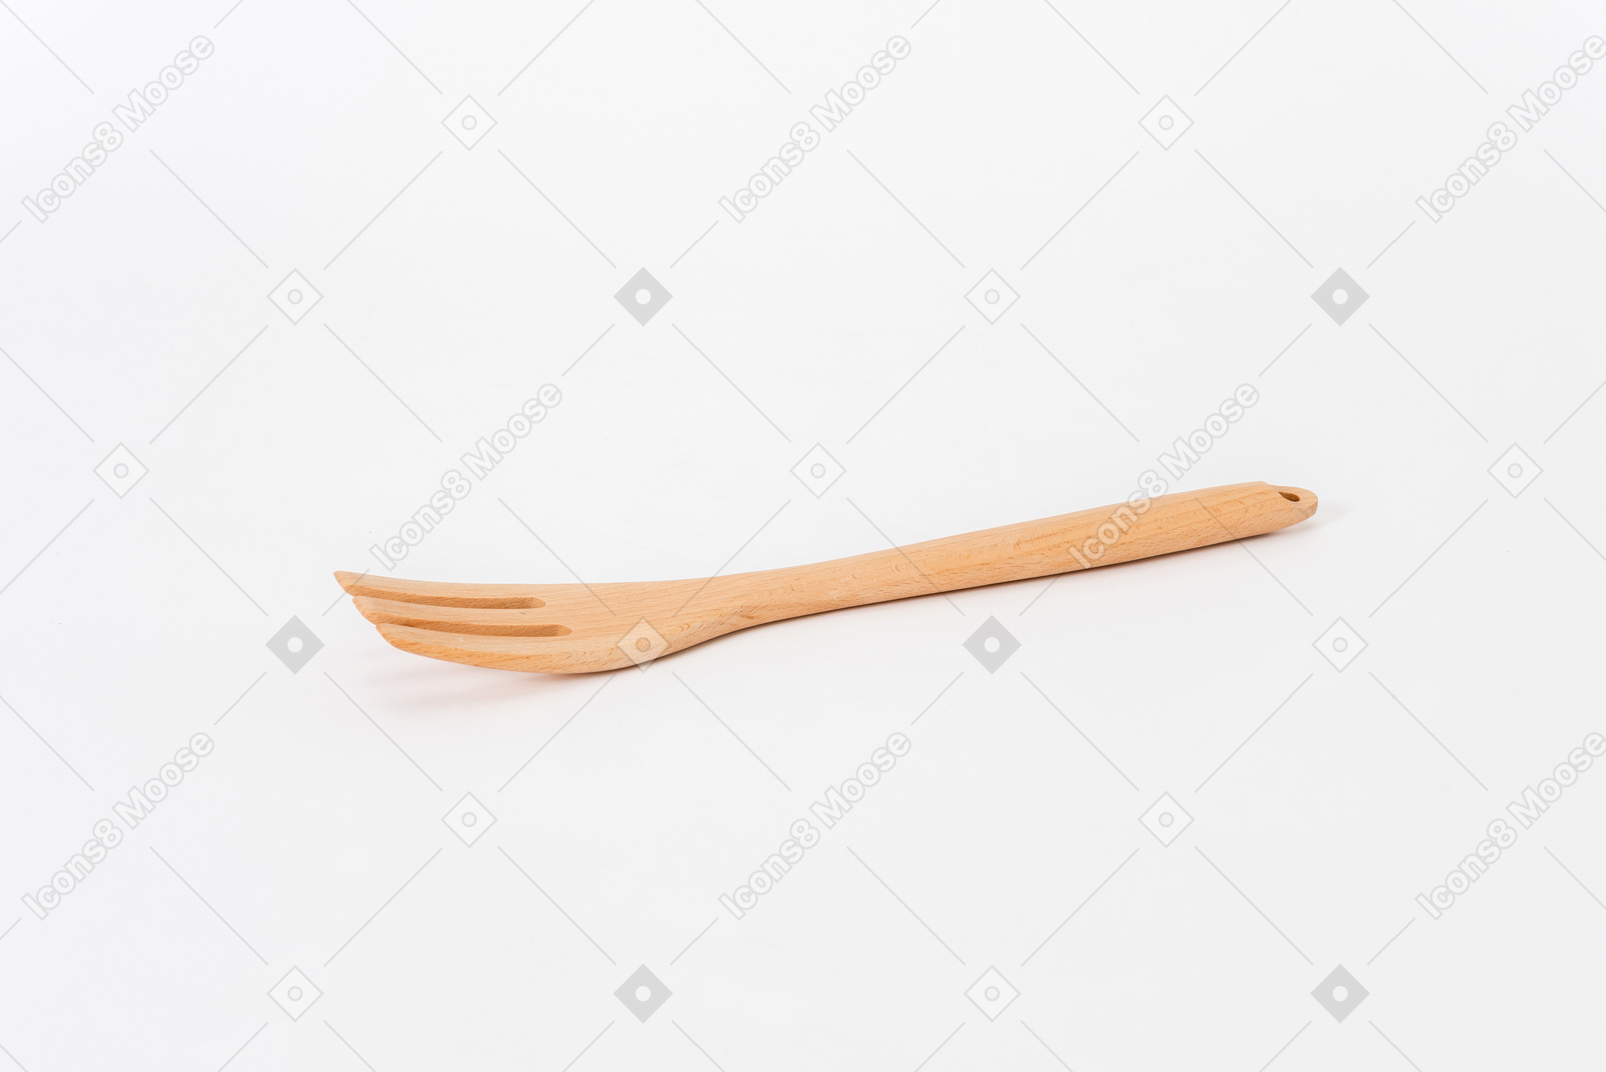 Wooden fork on white background shot from the side